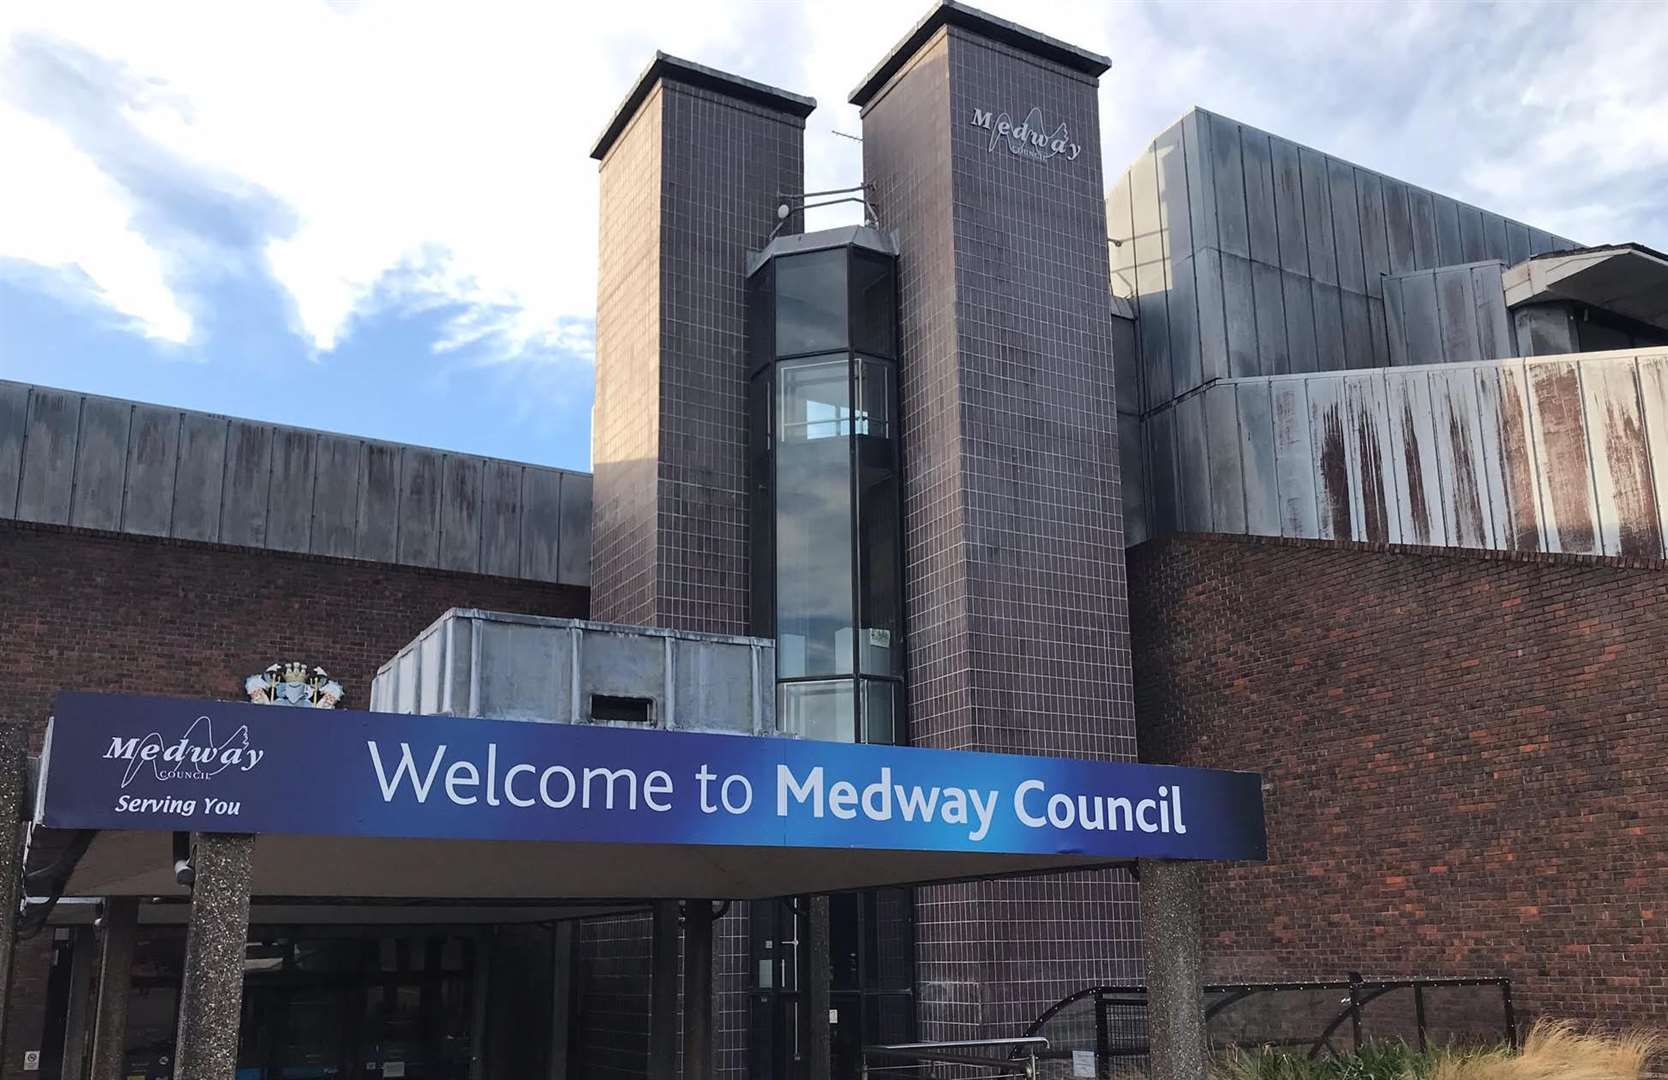 The HQ for Medway Council, Gun Wharf, has been closed since RAAC was discovered in October last year.